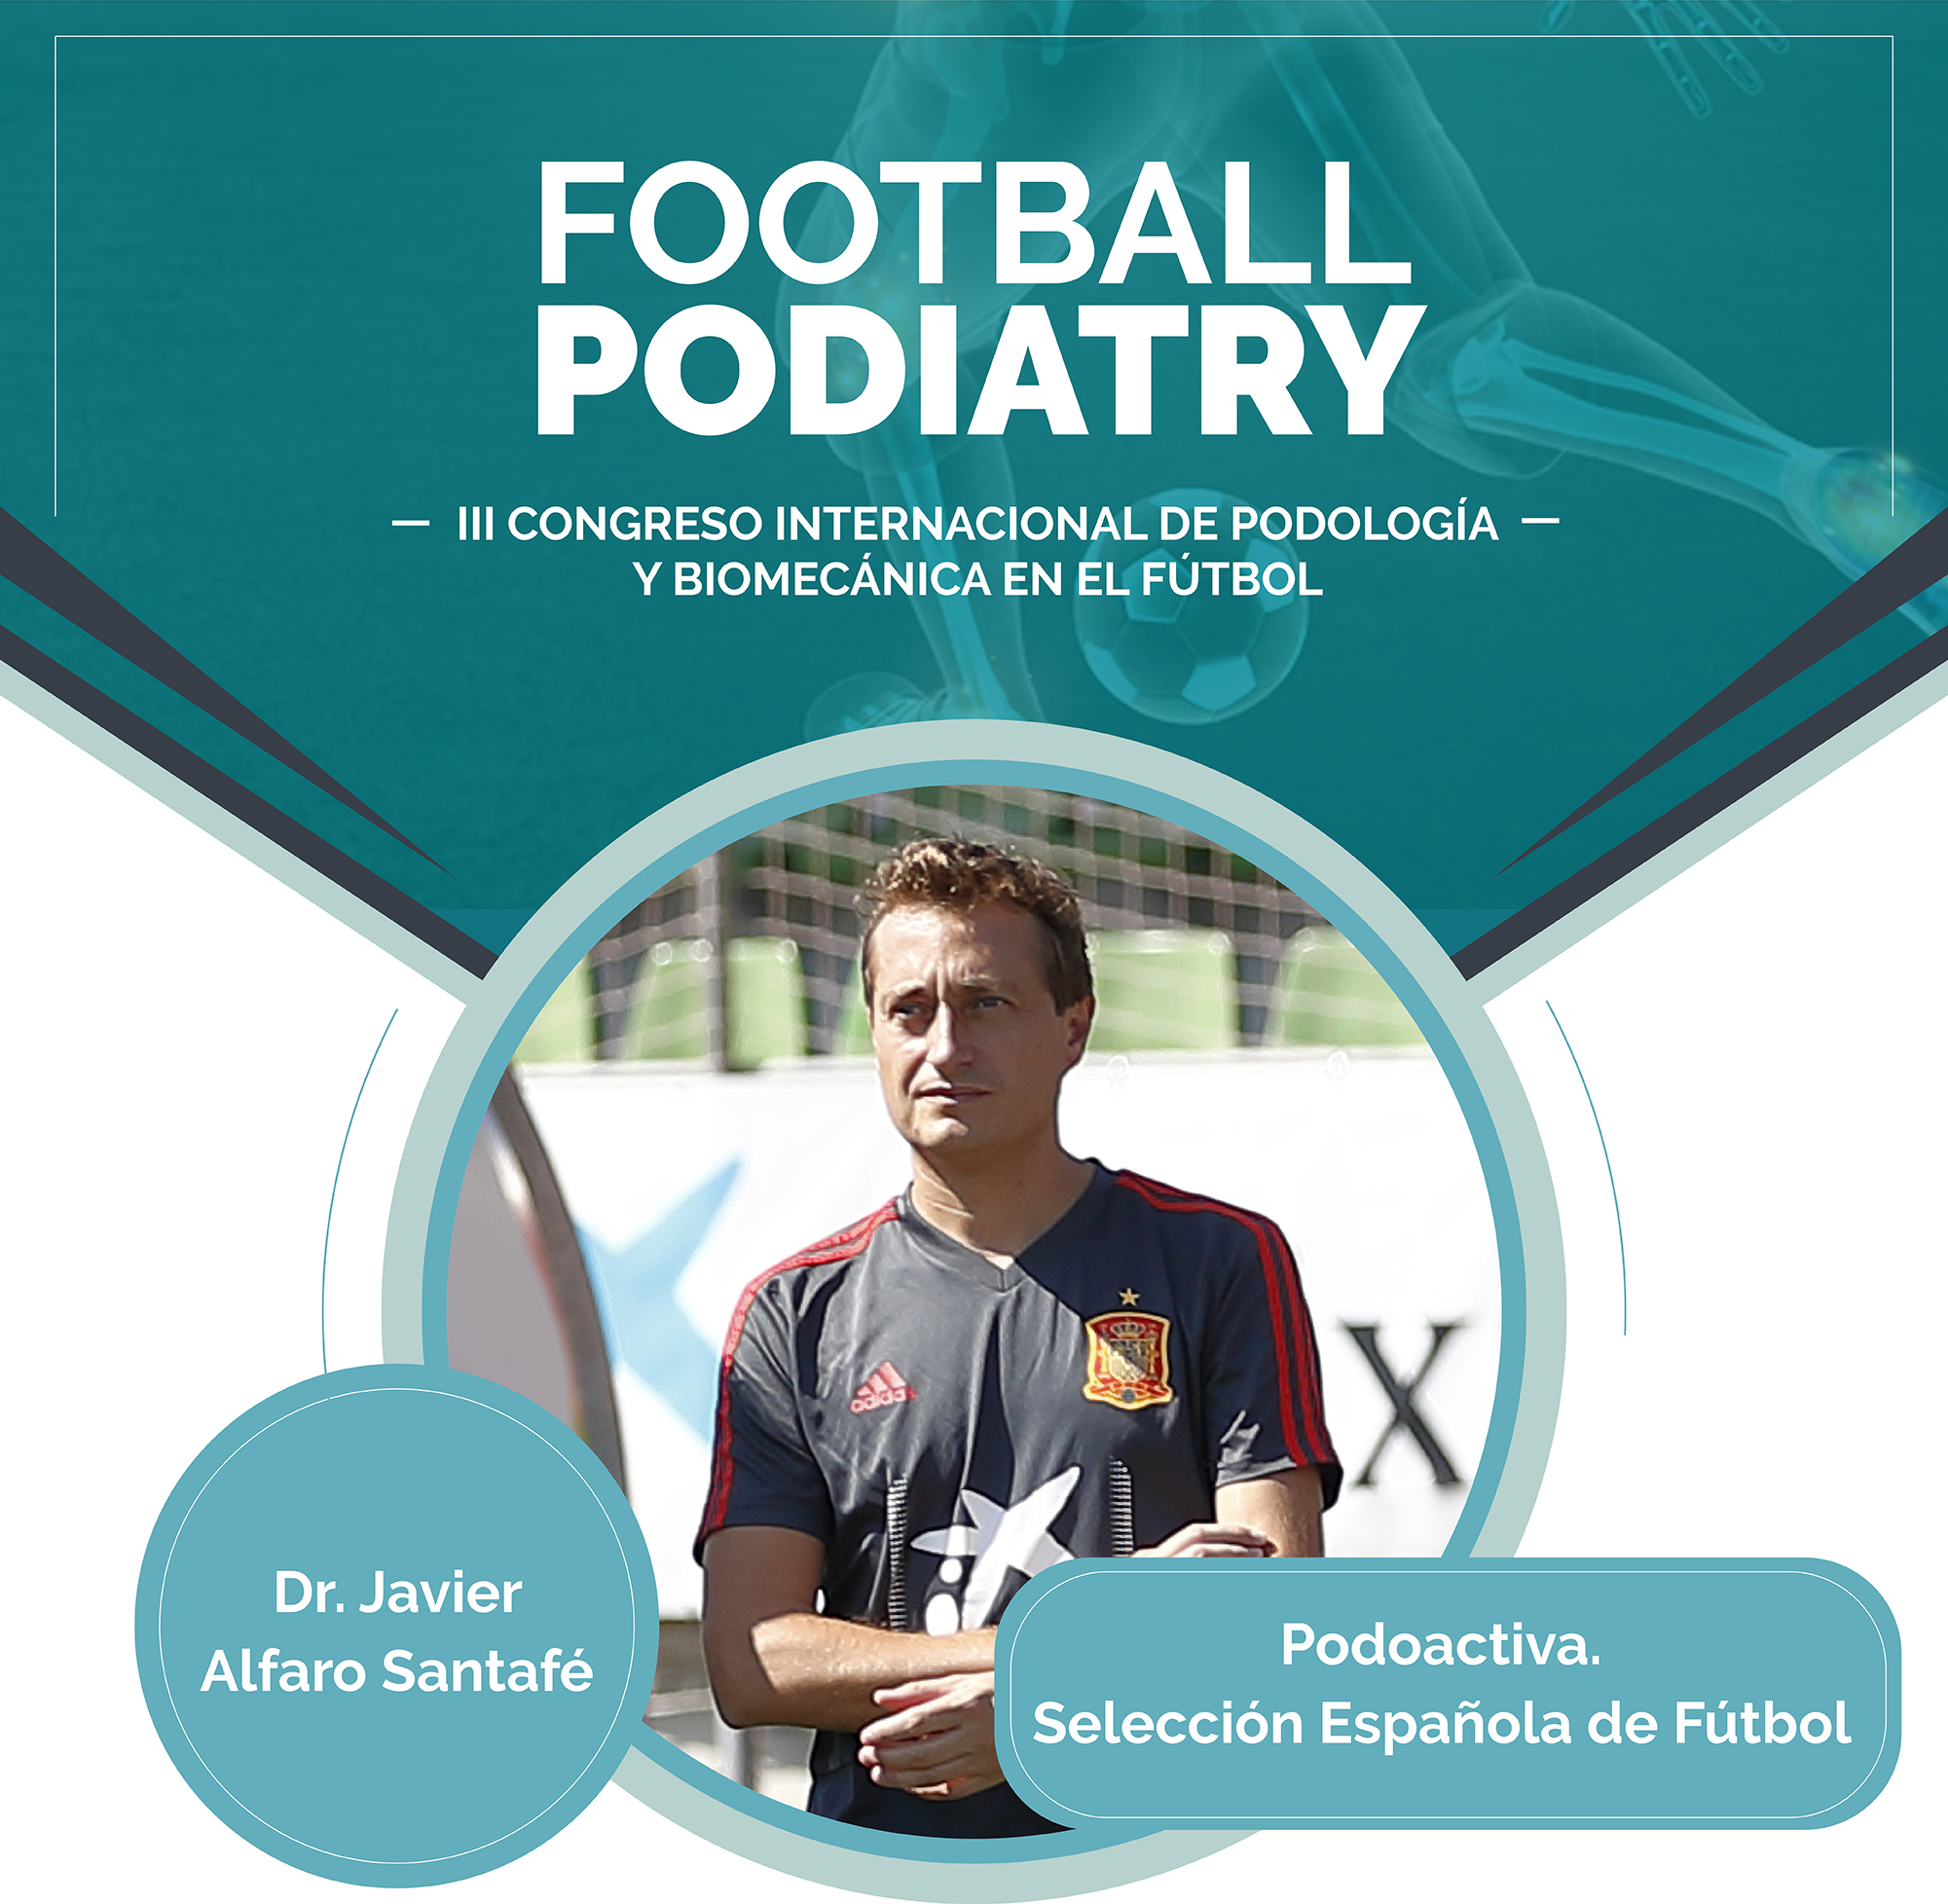 Blog - Football Podiatry Conference